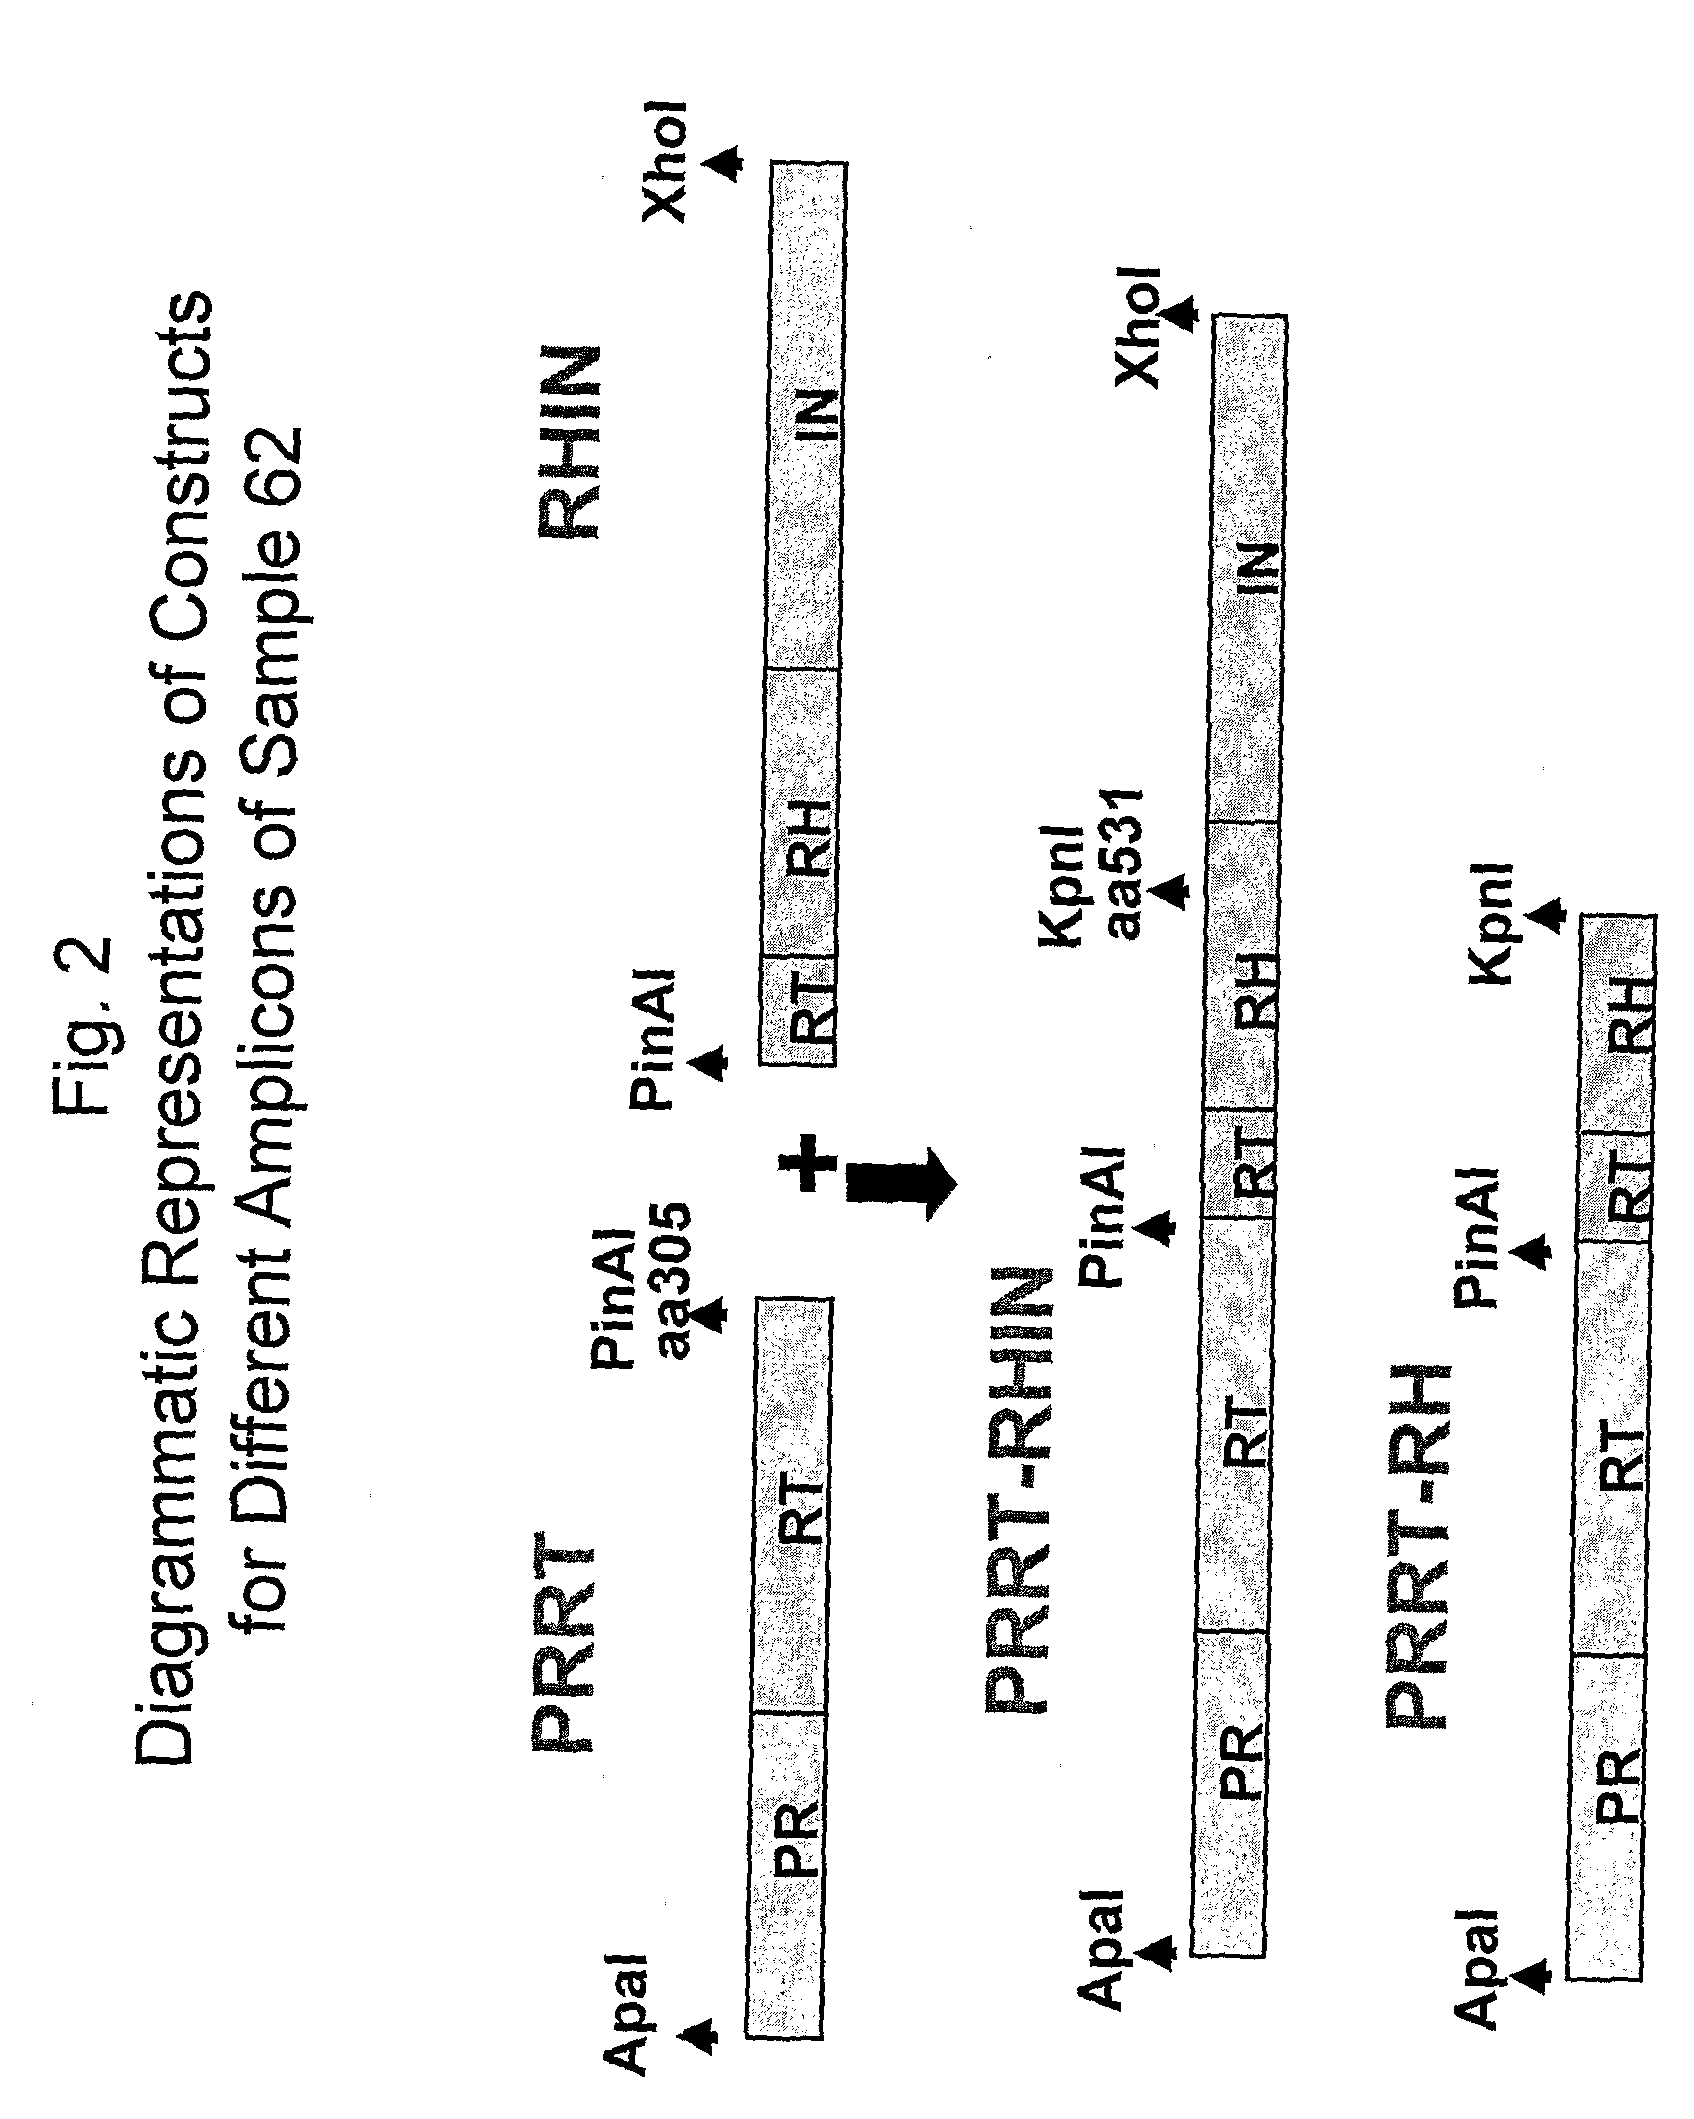 Methods and compositions for determining altered susceptibility of HIV-1 to anti-HIV drugs